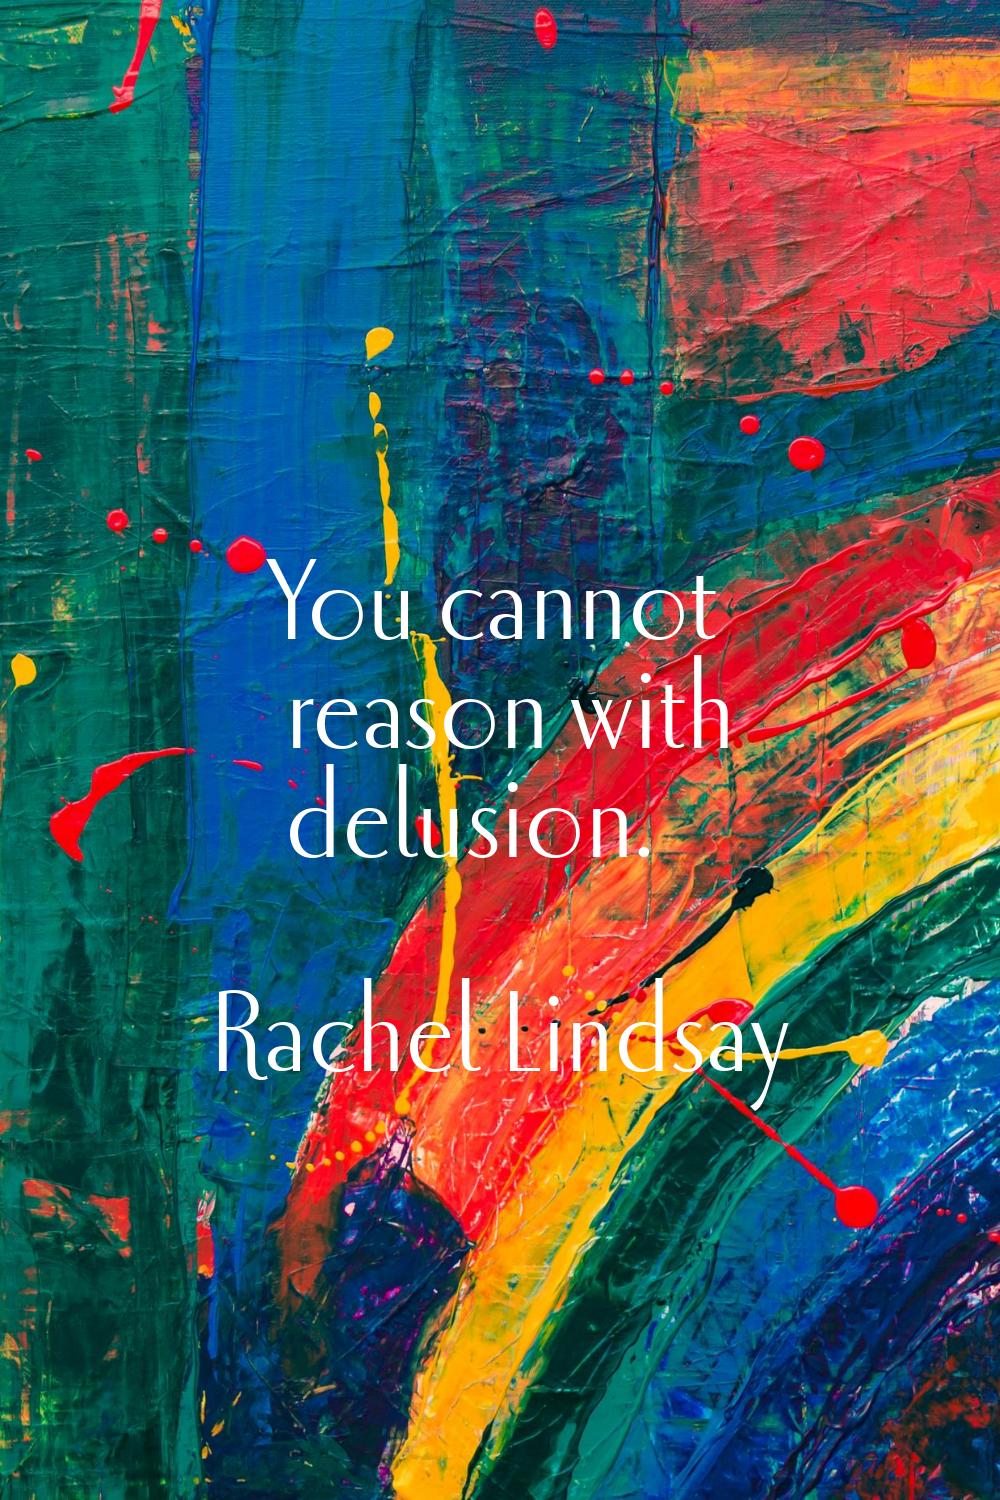 You cannot reason with delusion.